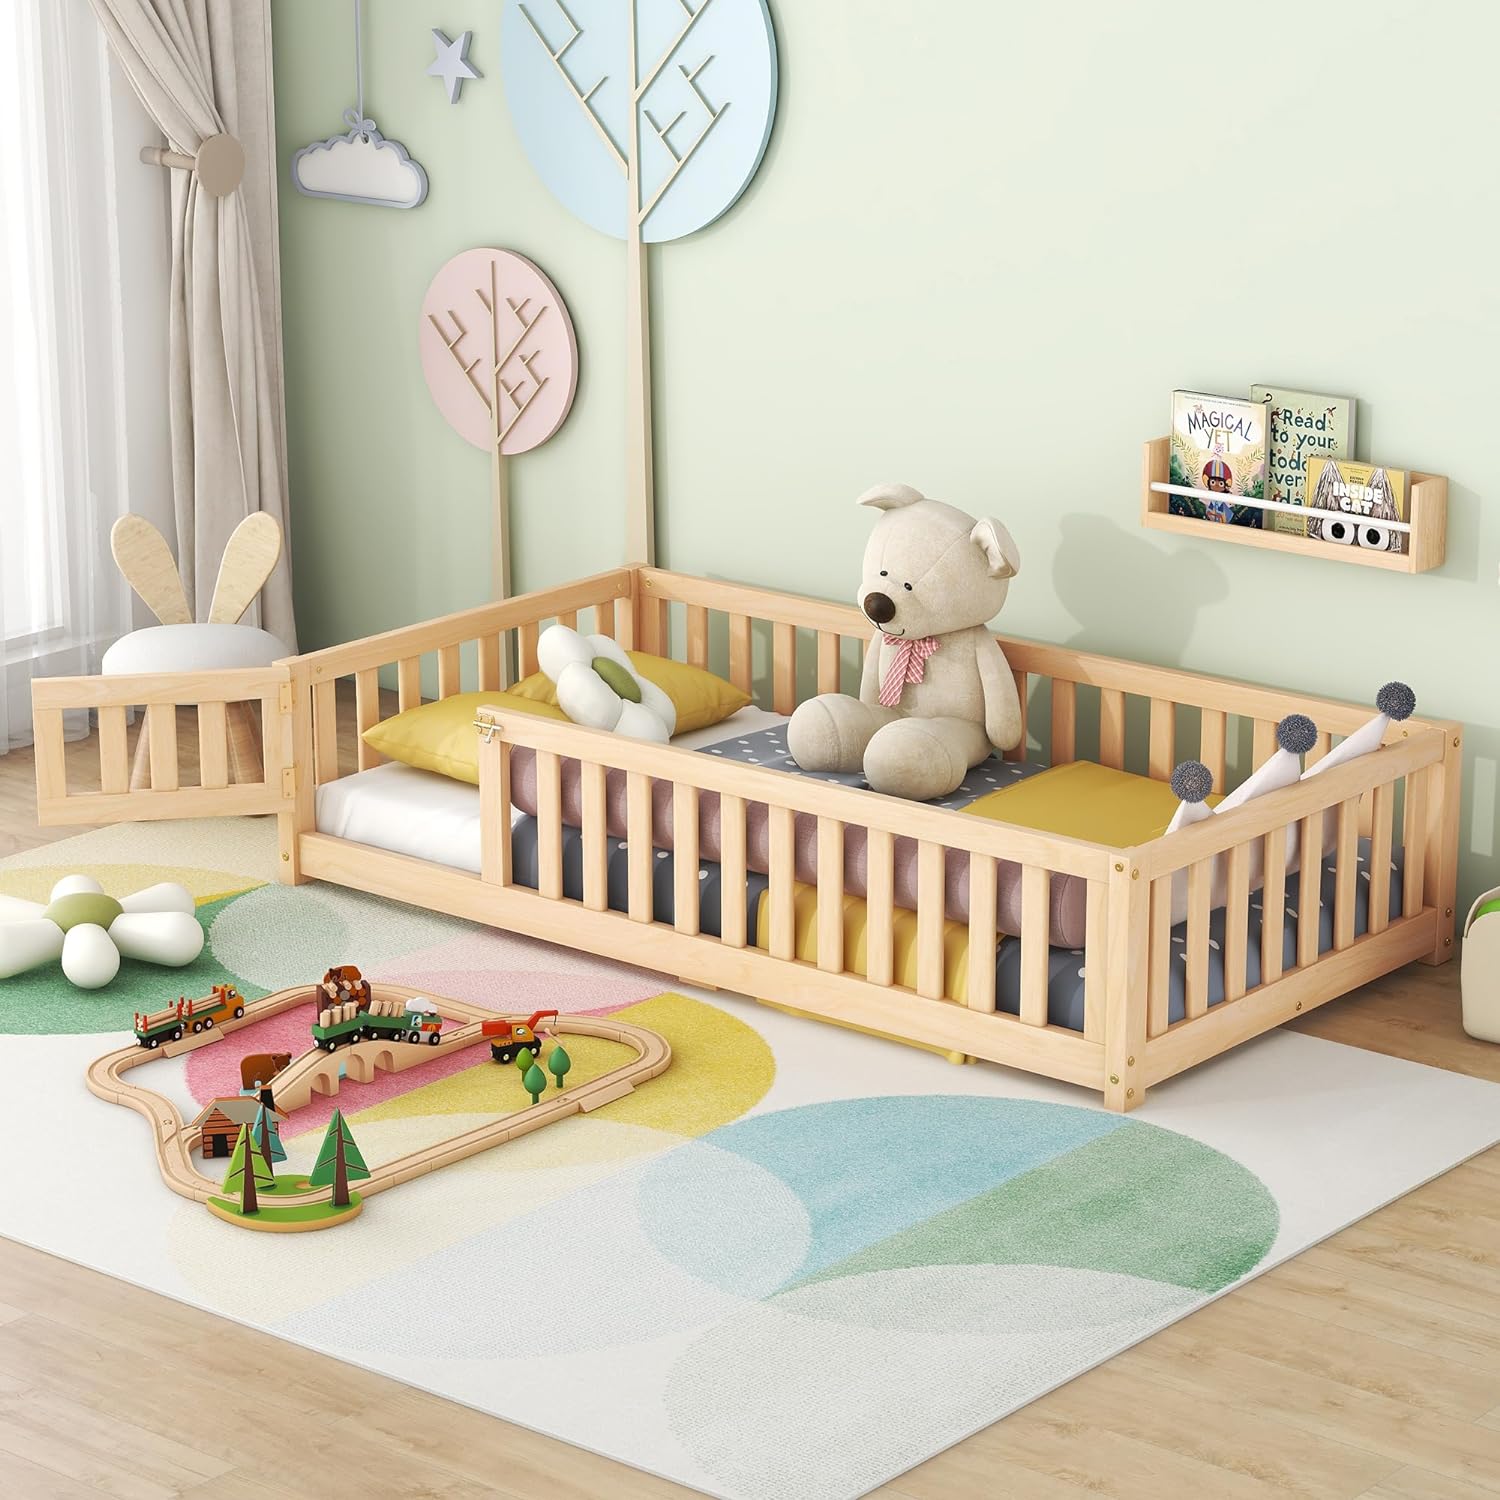 Montessori Inspired Toddler Floor Bed with Rails